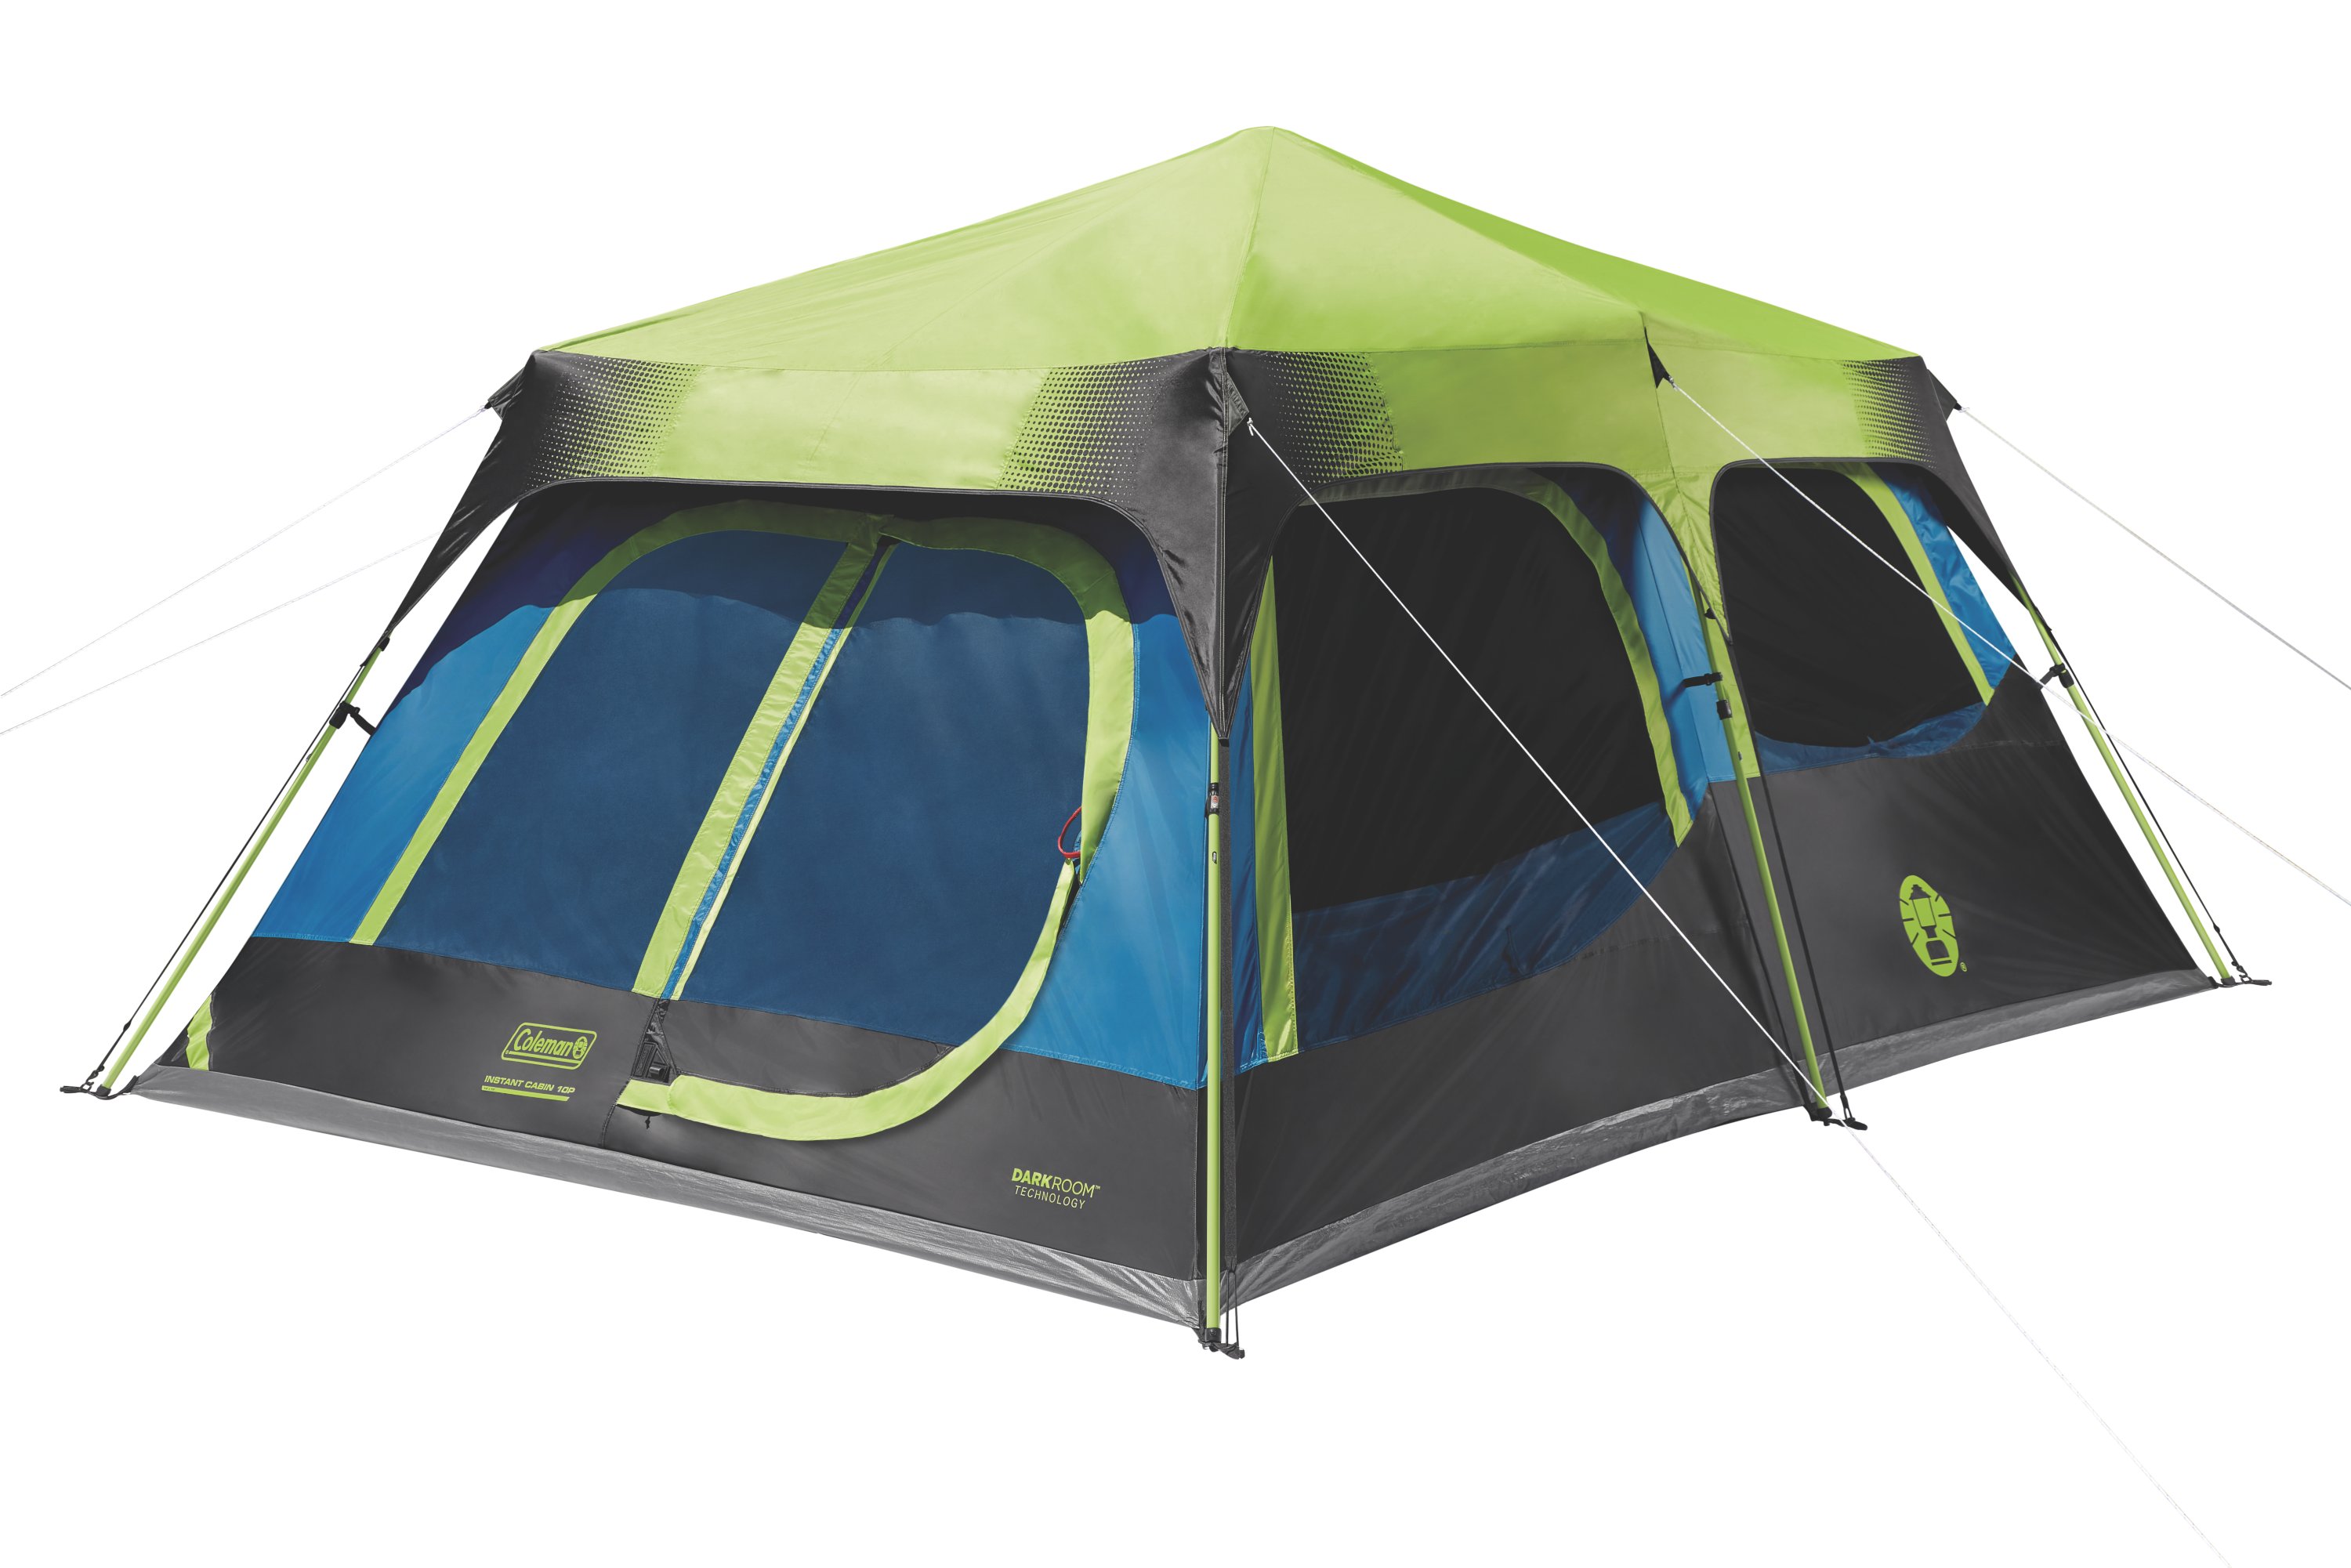 Is The Coleman Instant Tent Waterproof? A Comprehensive Review